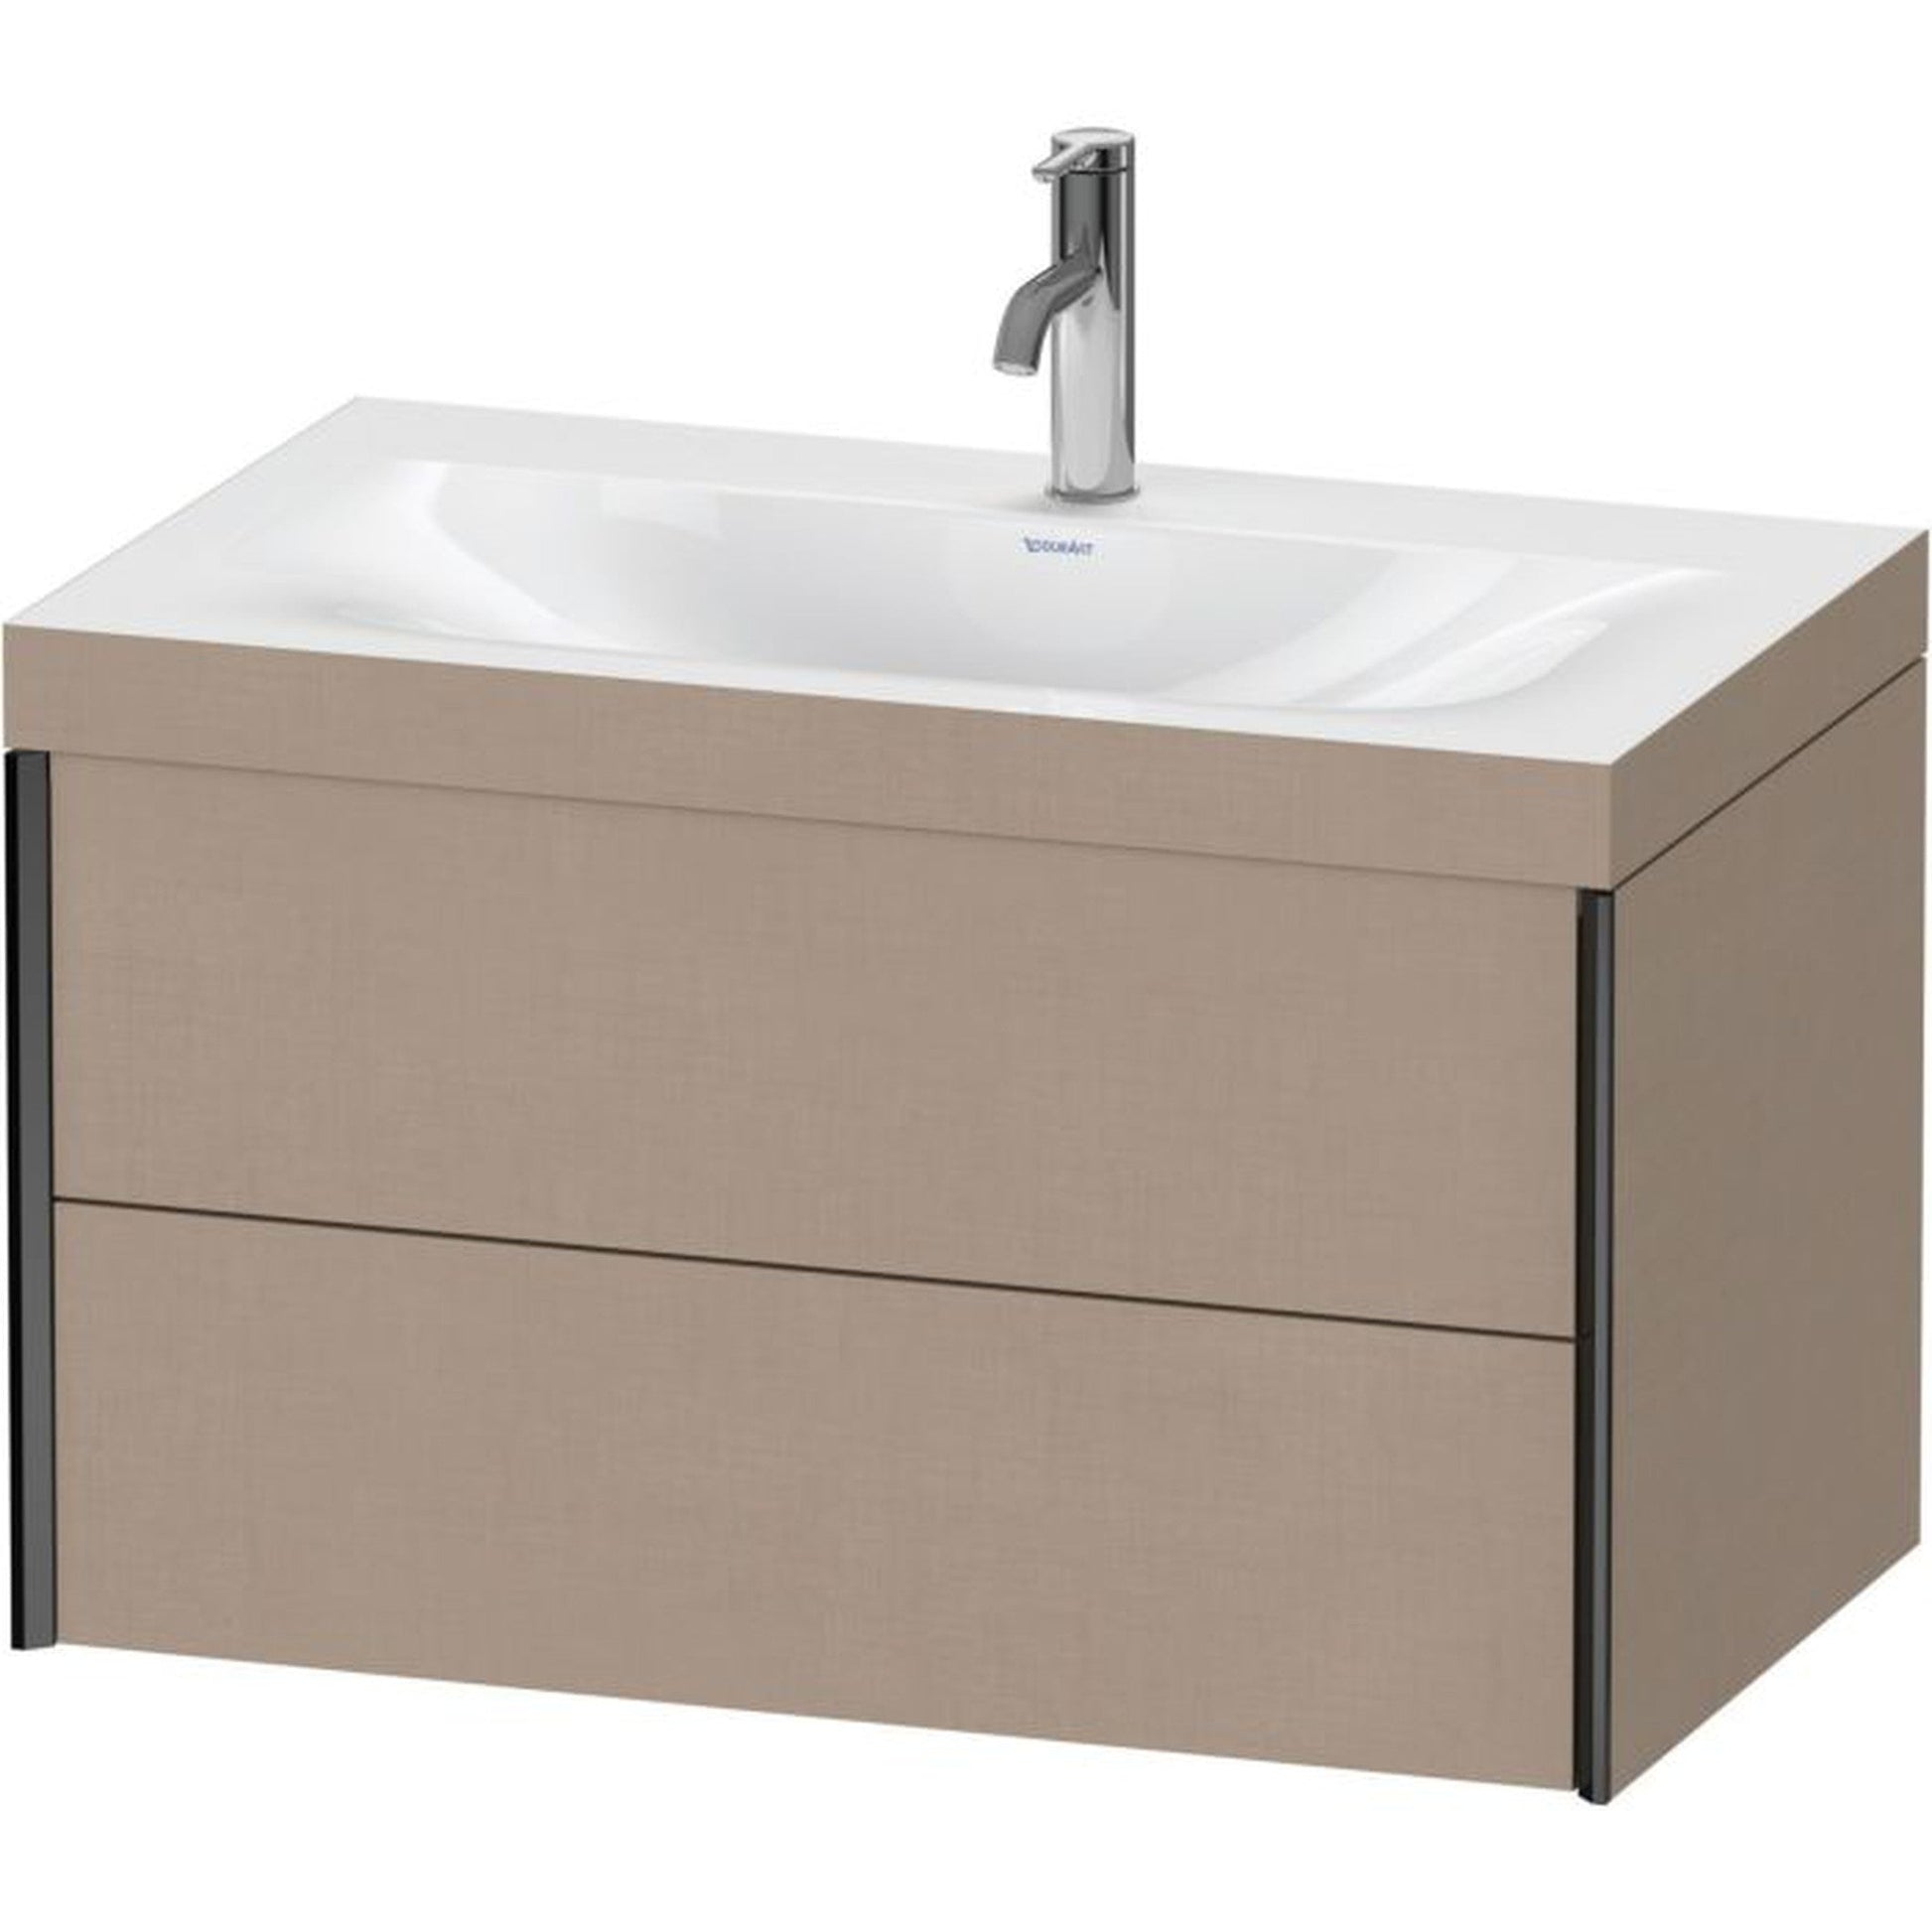 Duravit Xviu 31" x 20" x 19" Two Drawer C-Bonded Wall-Mount Vanity Kit With One Tap Hole, Linen (XV4615OB275C)